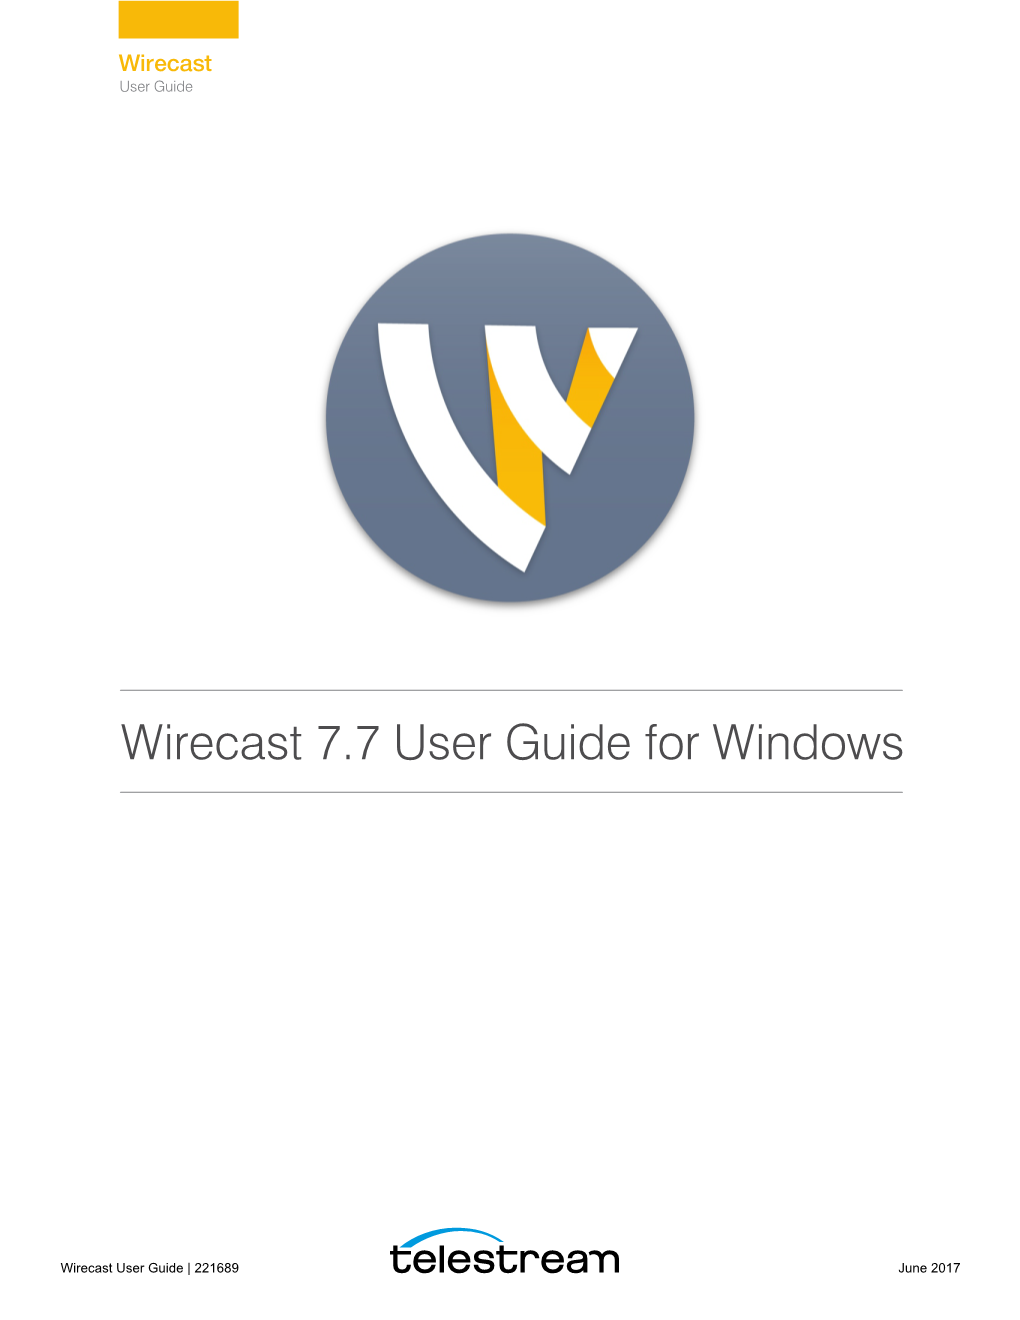 Wirecast 7.7 User Guide for Windows